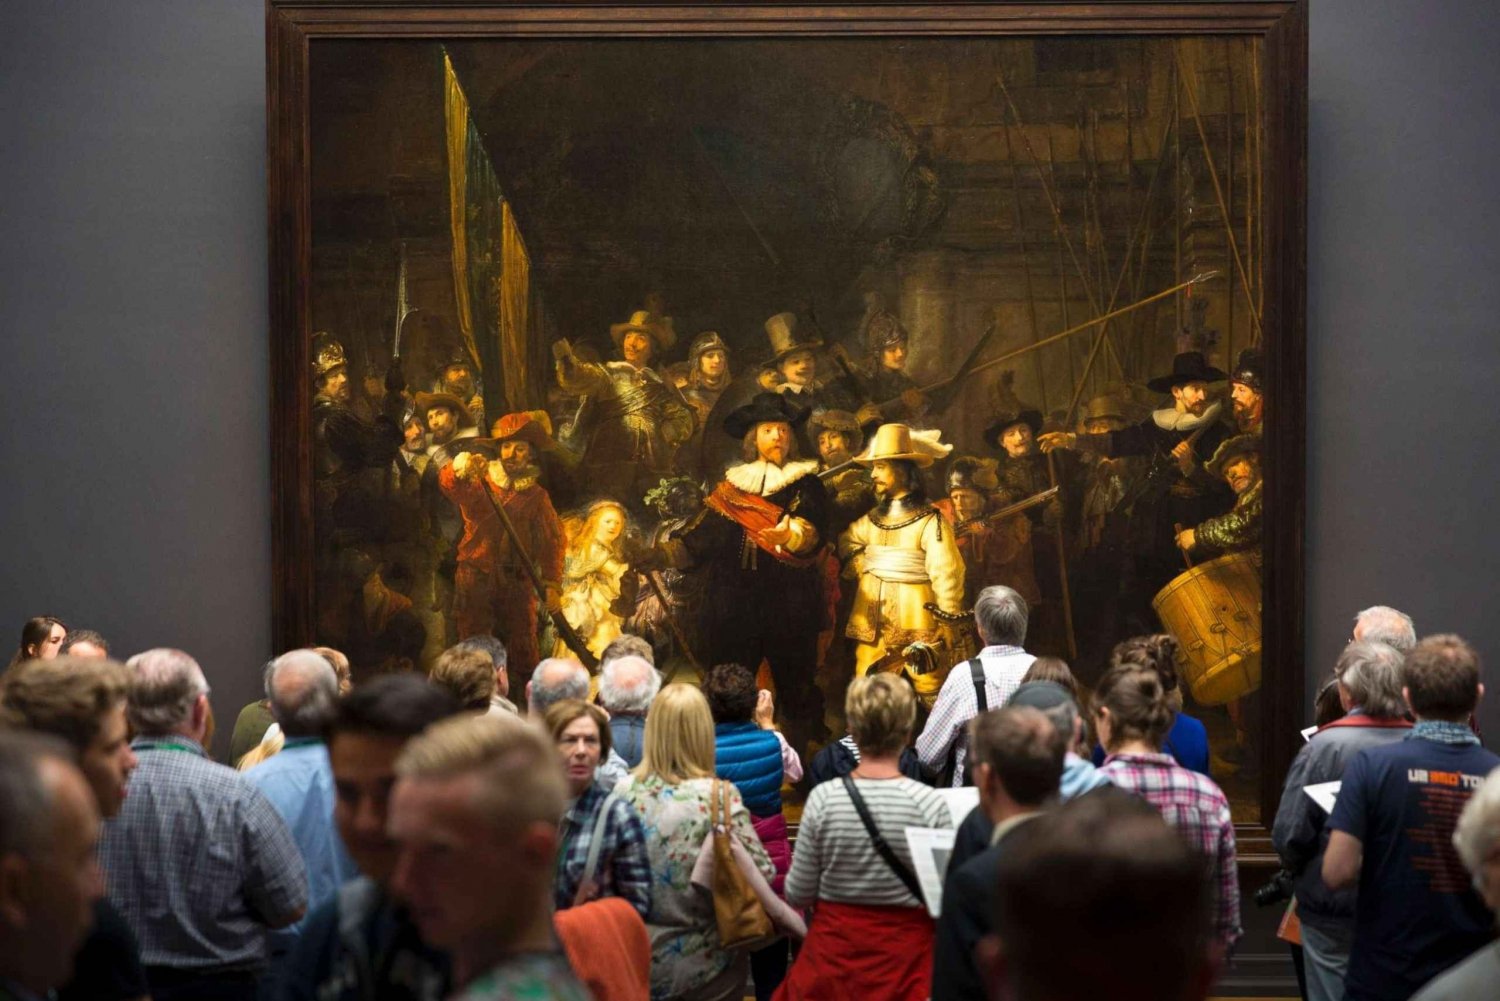 Rijksmuseum 7 Highlights Audio Guide- Admission NOT included